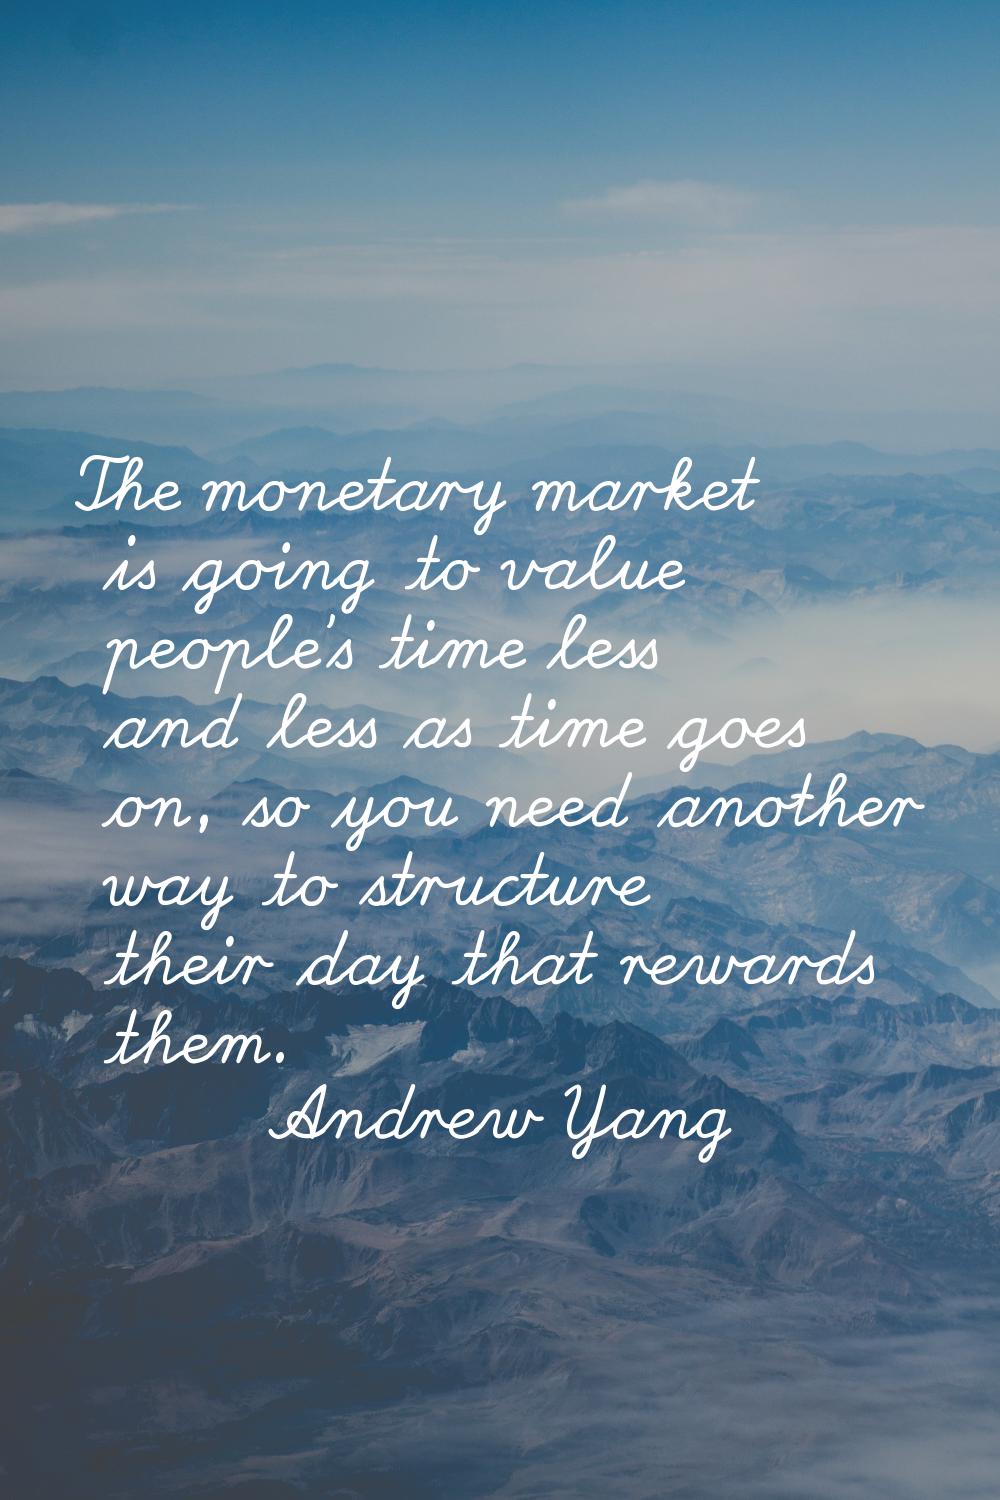 The monetary market is going to value people's time less and less as time goes on, so you need anot